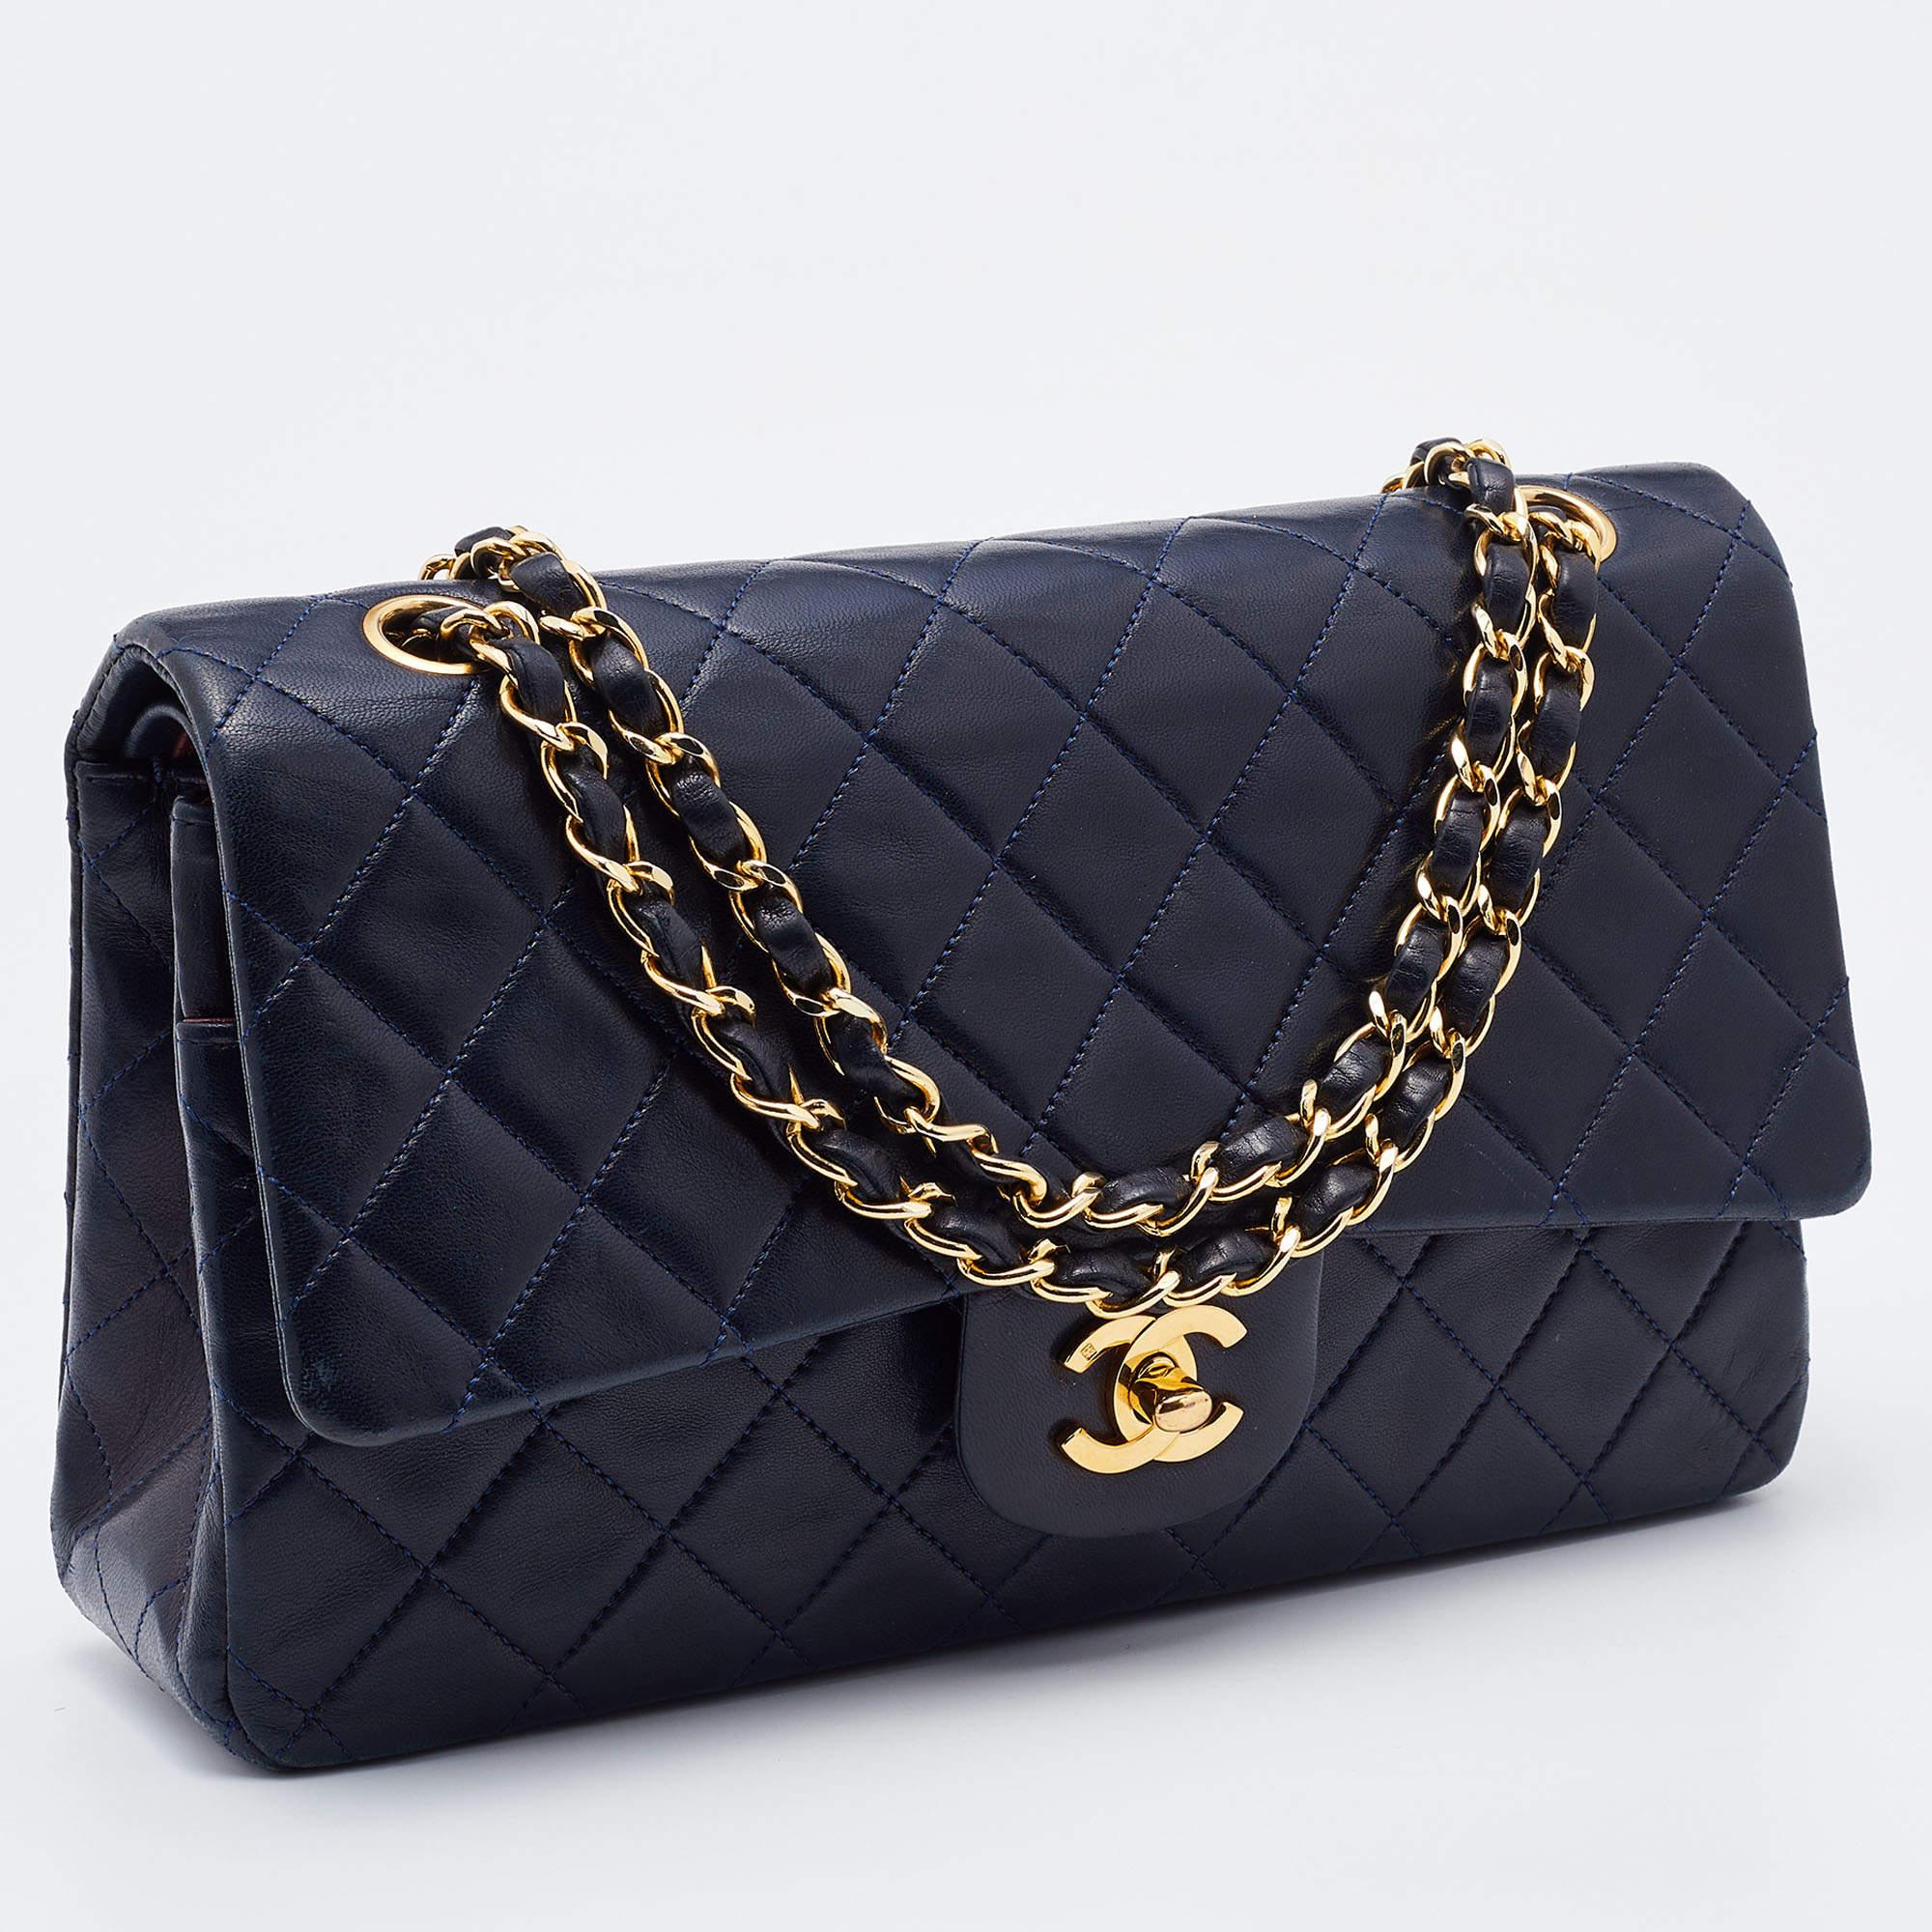 chanel blue quilted handbag